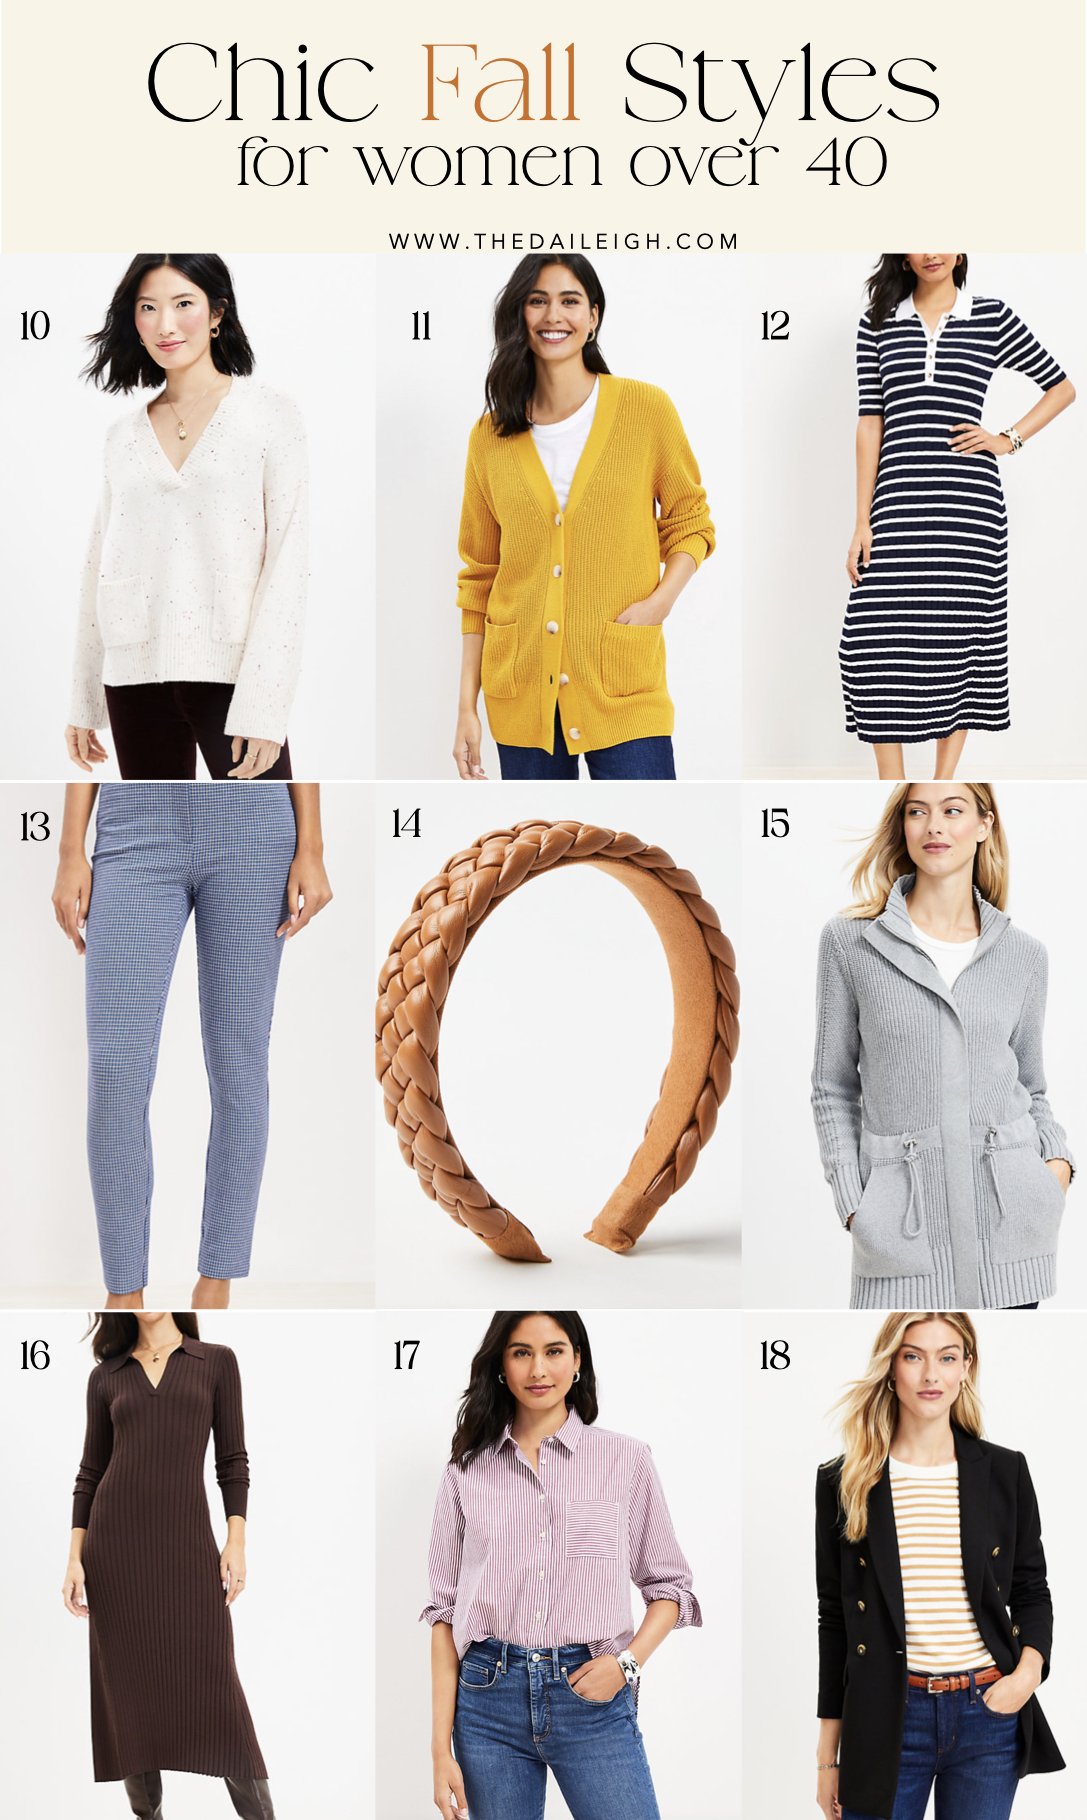 LOFT Fall Styles for Women Over 40 — THE DAILEIGH